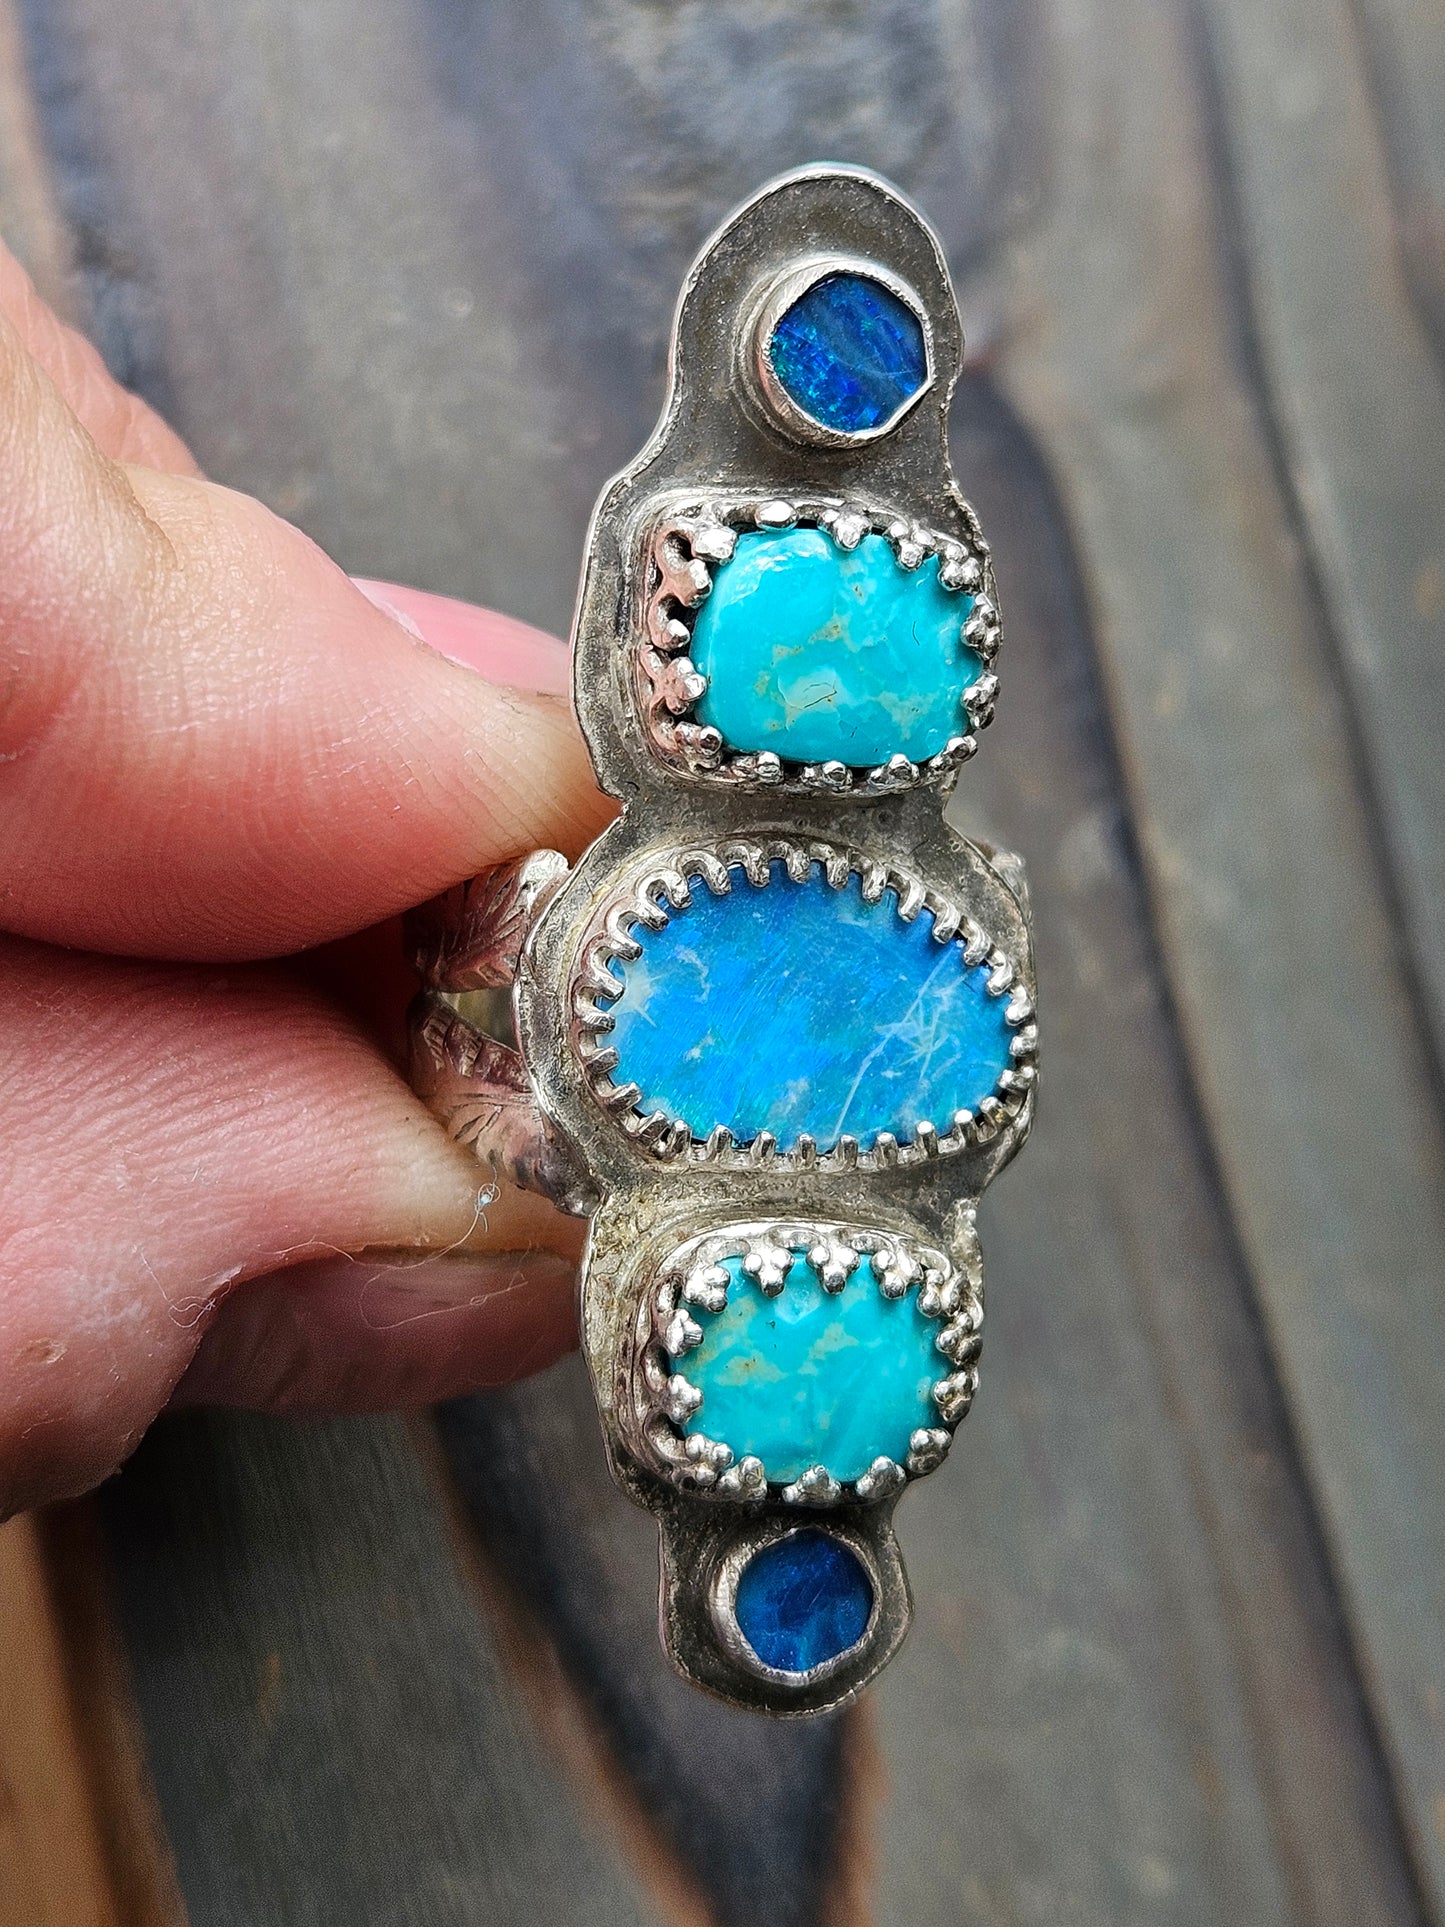 Australian Opal and Turquoise statement ring, size 8